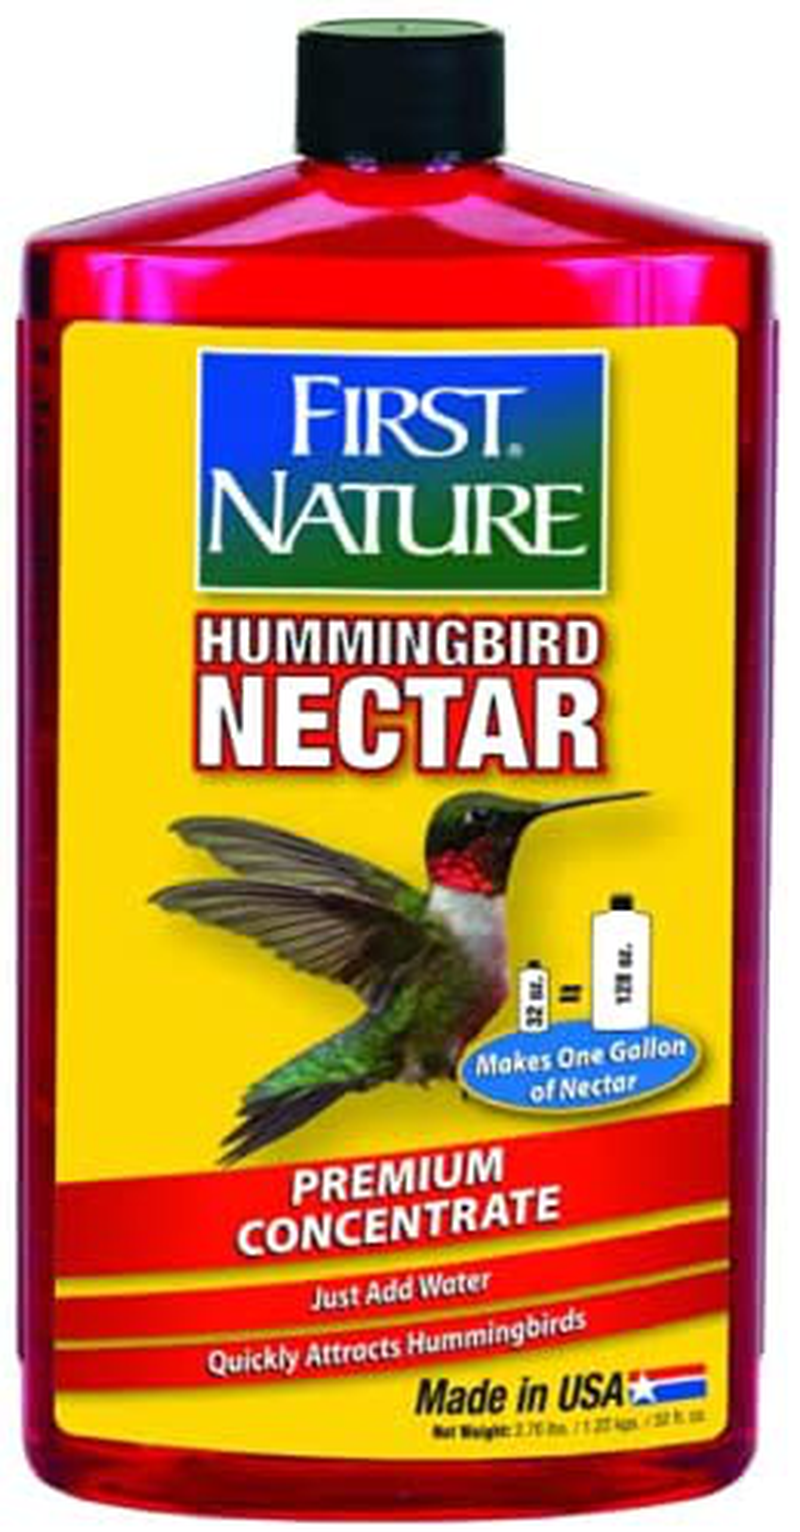 First Nature 3054 Red Hummingbird Nectar, 32-ounce Concentrate